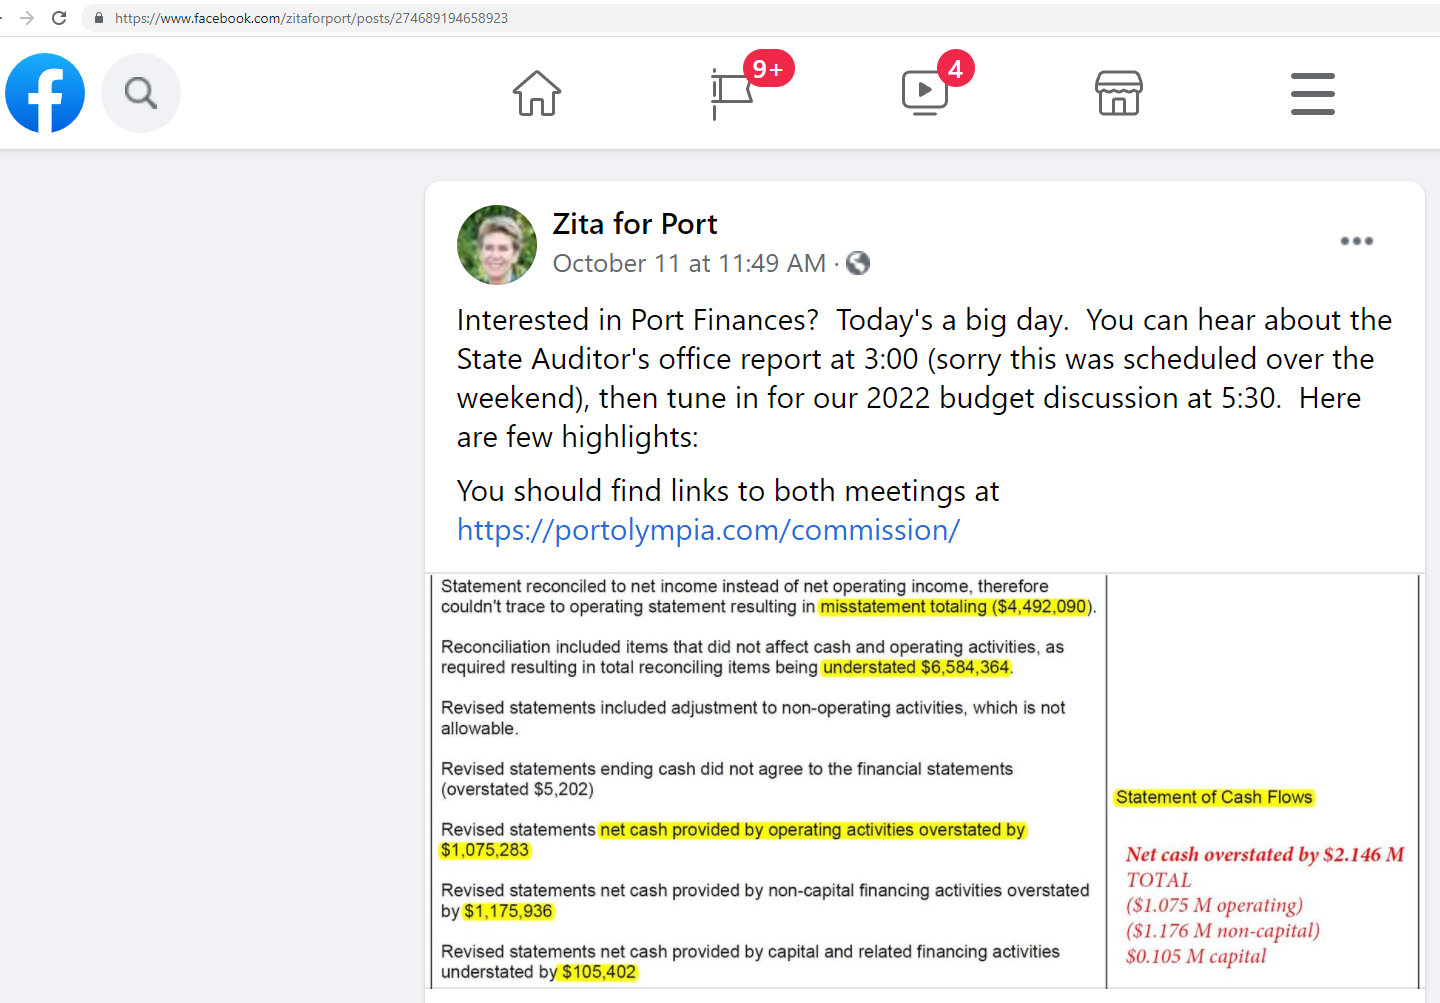 Port of Olympia Commissioner E.J. Zita posted this comment over a comment on Facebook on Mon., Oct. 11, 2021